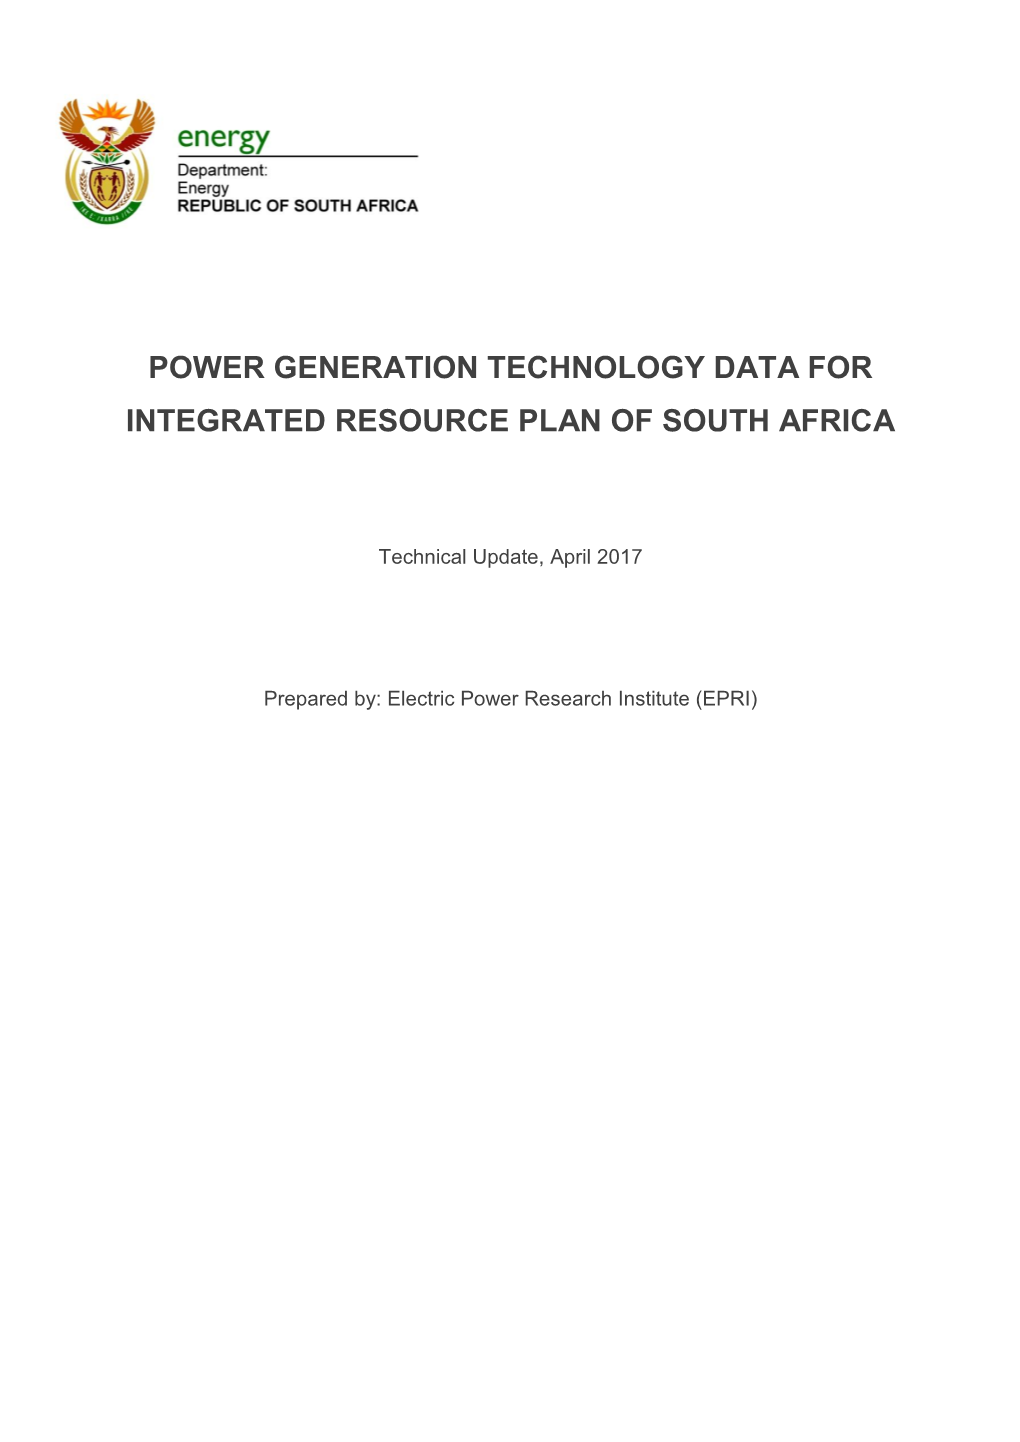 Power Generation Technology Data for Integrated Resource Plan of South Africa